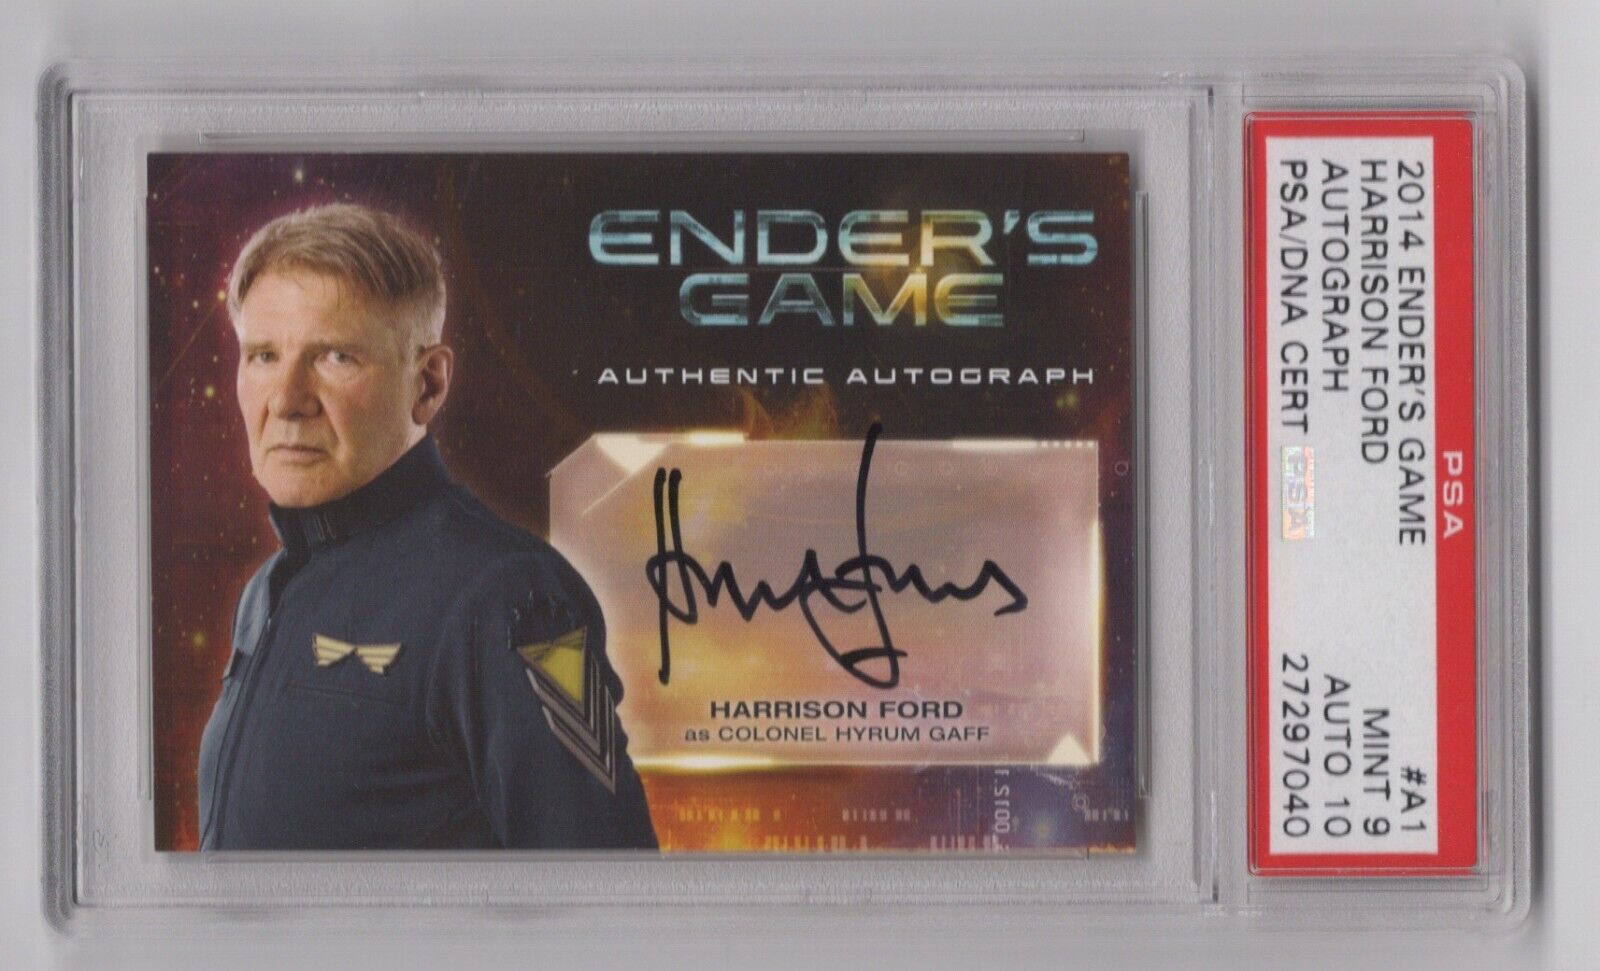 Harrison Ford as Hyrum Gaff ENDER'S GAME Autograph Card PSA 9 Mint 10 Auto A1